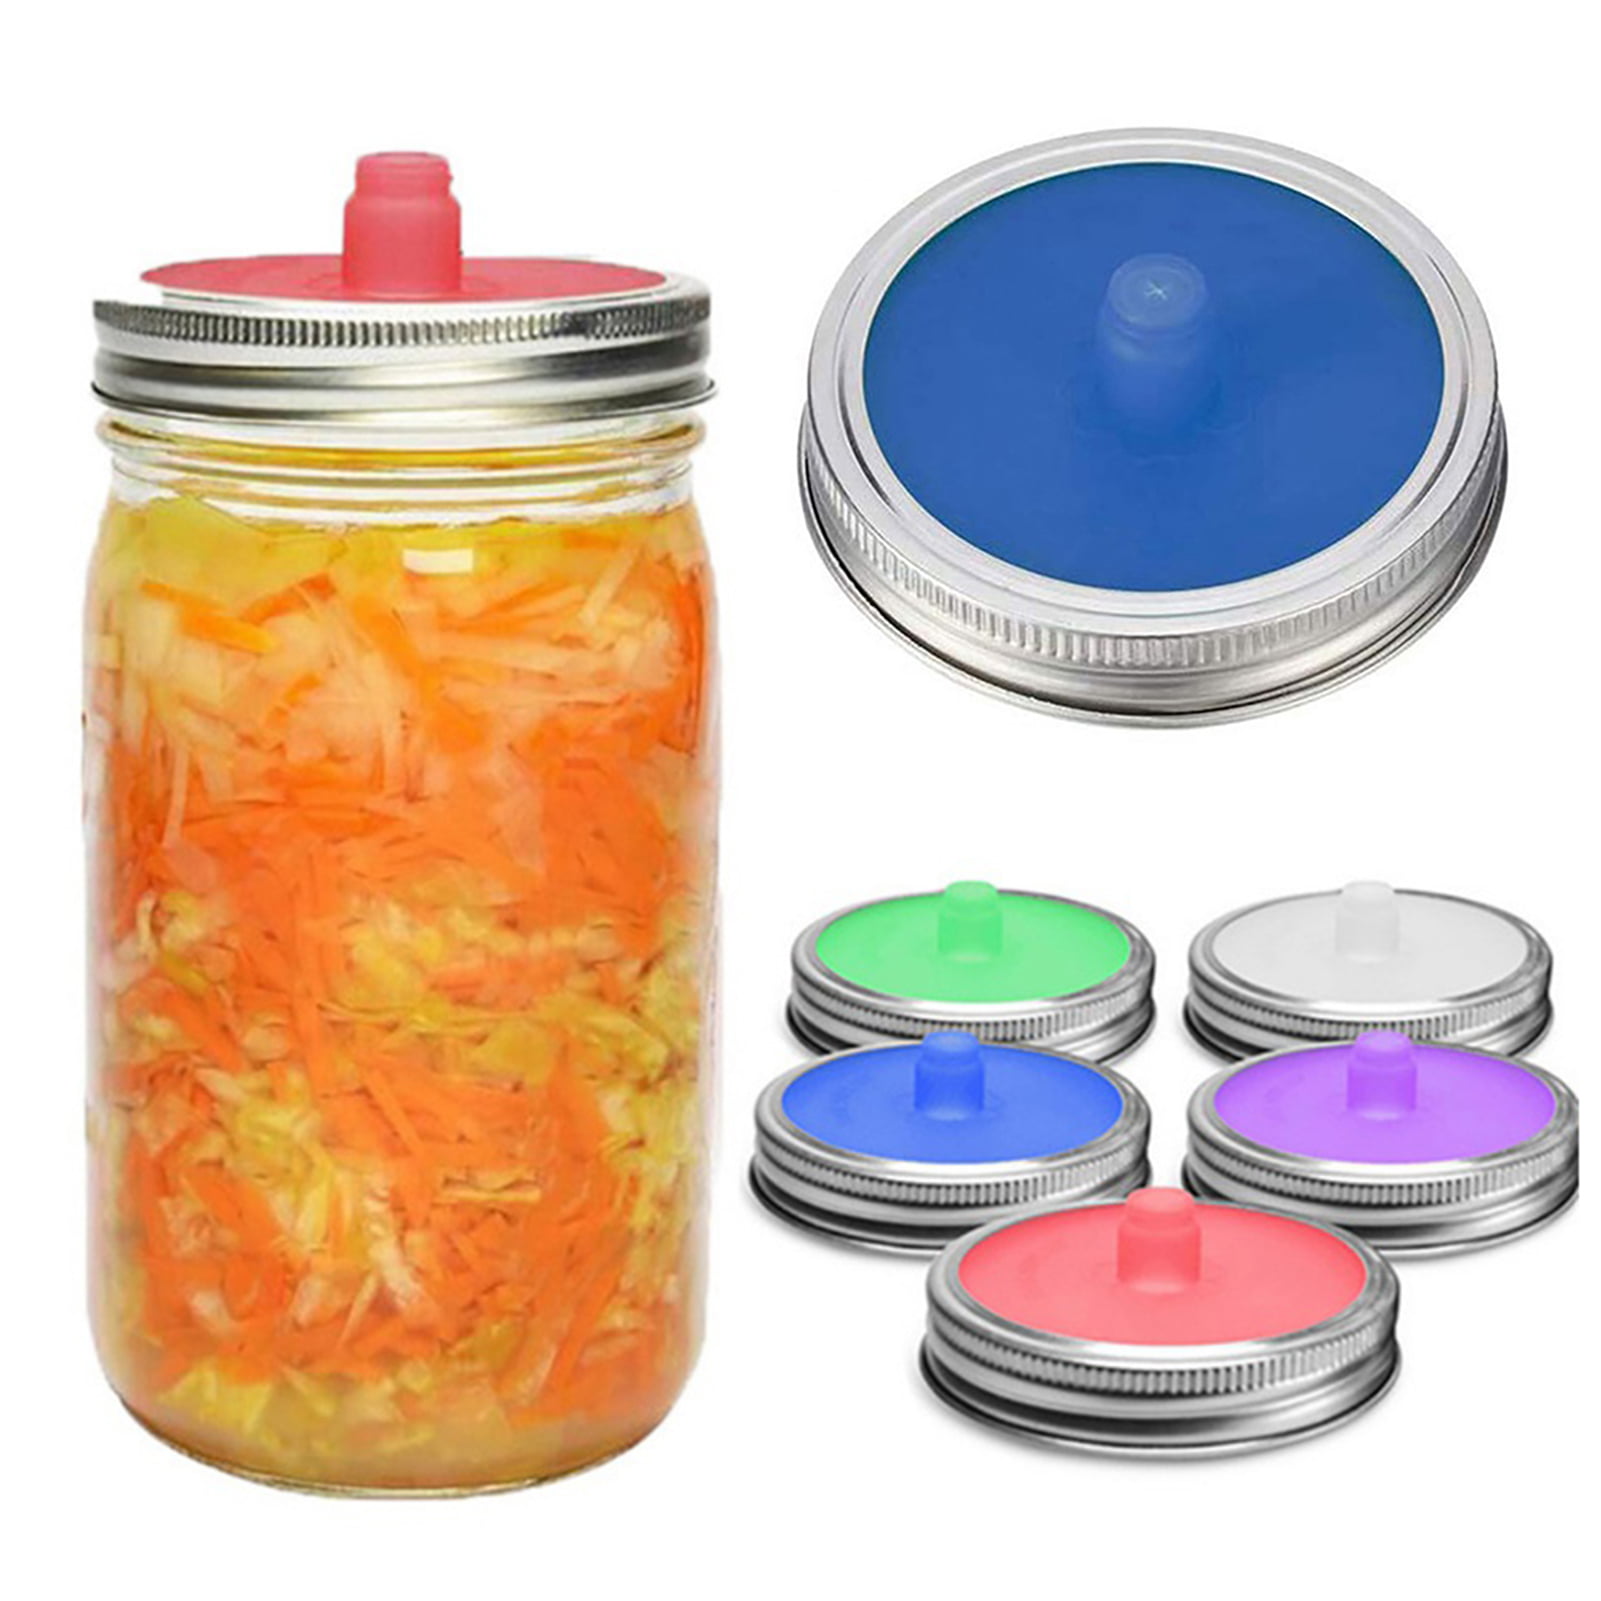 Kimchi 5pcs Food-Grade Silicone Airlock Fermentation Lids and 5pcs Stainless Steel Bands for Sauerkraut Set of 10 Wide Mouth Mason Jar Fermenting Lids for Ball & Kerr Mason Jar and More Pickles 